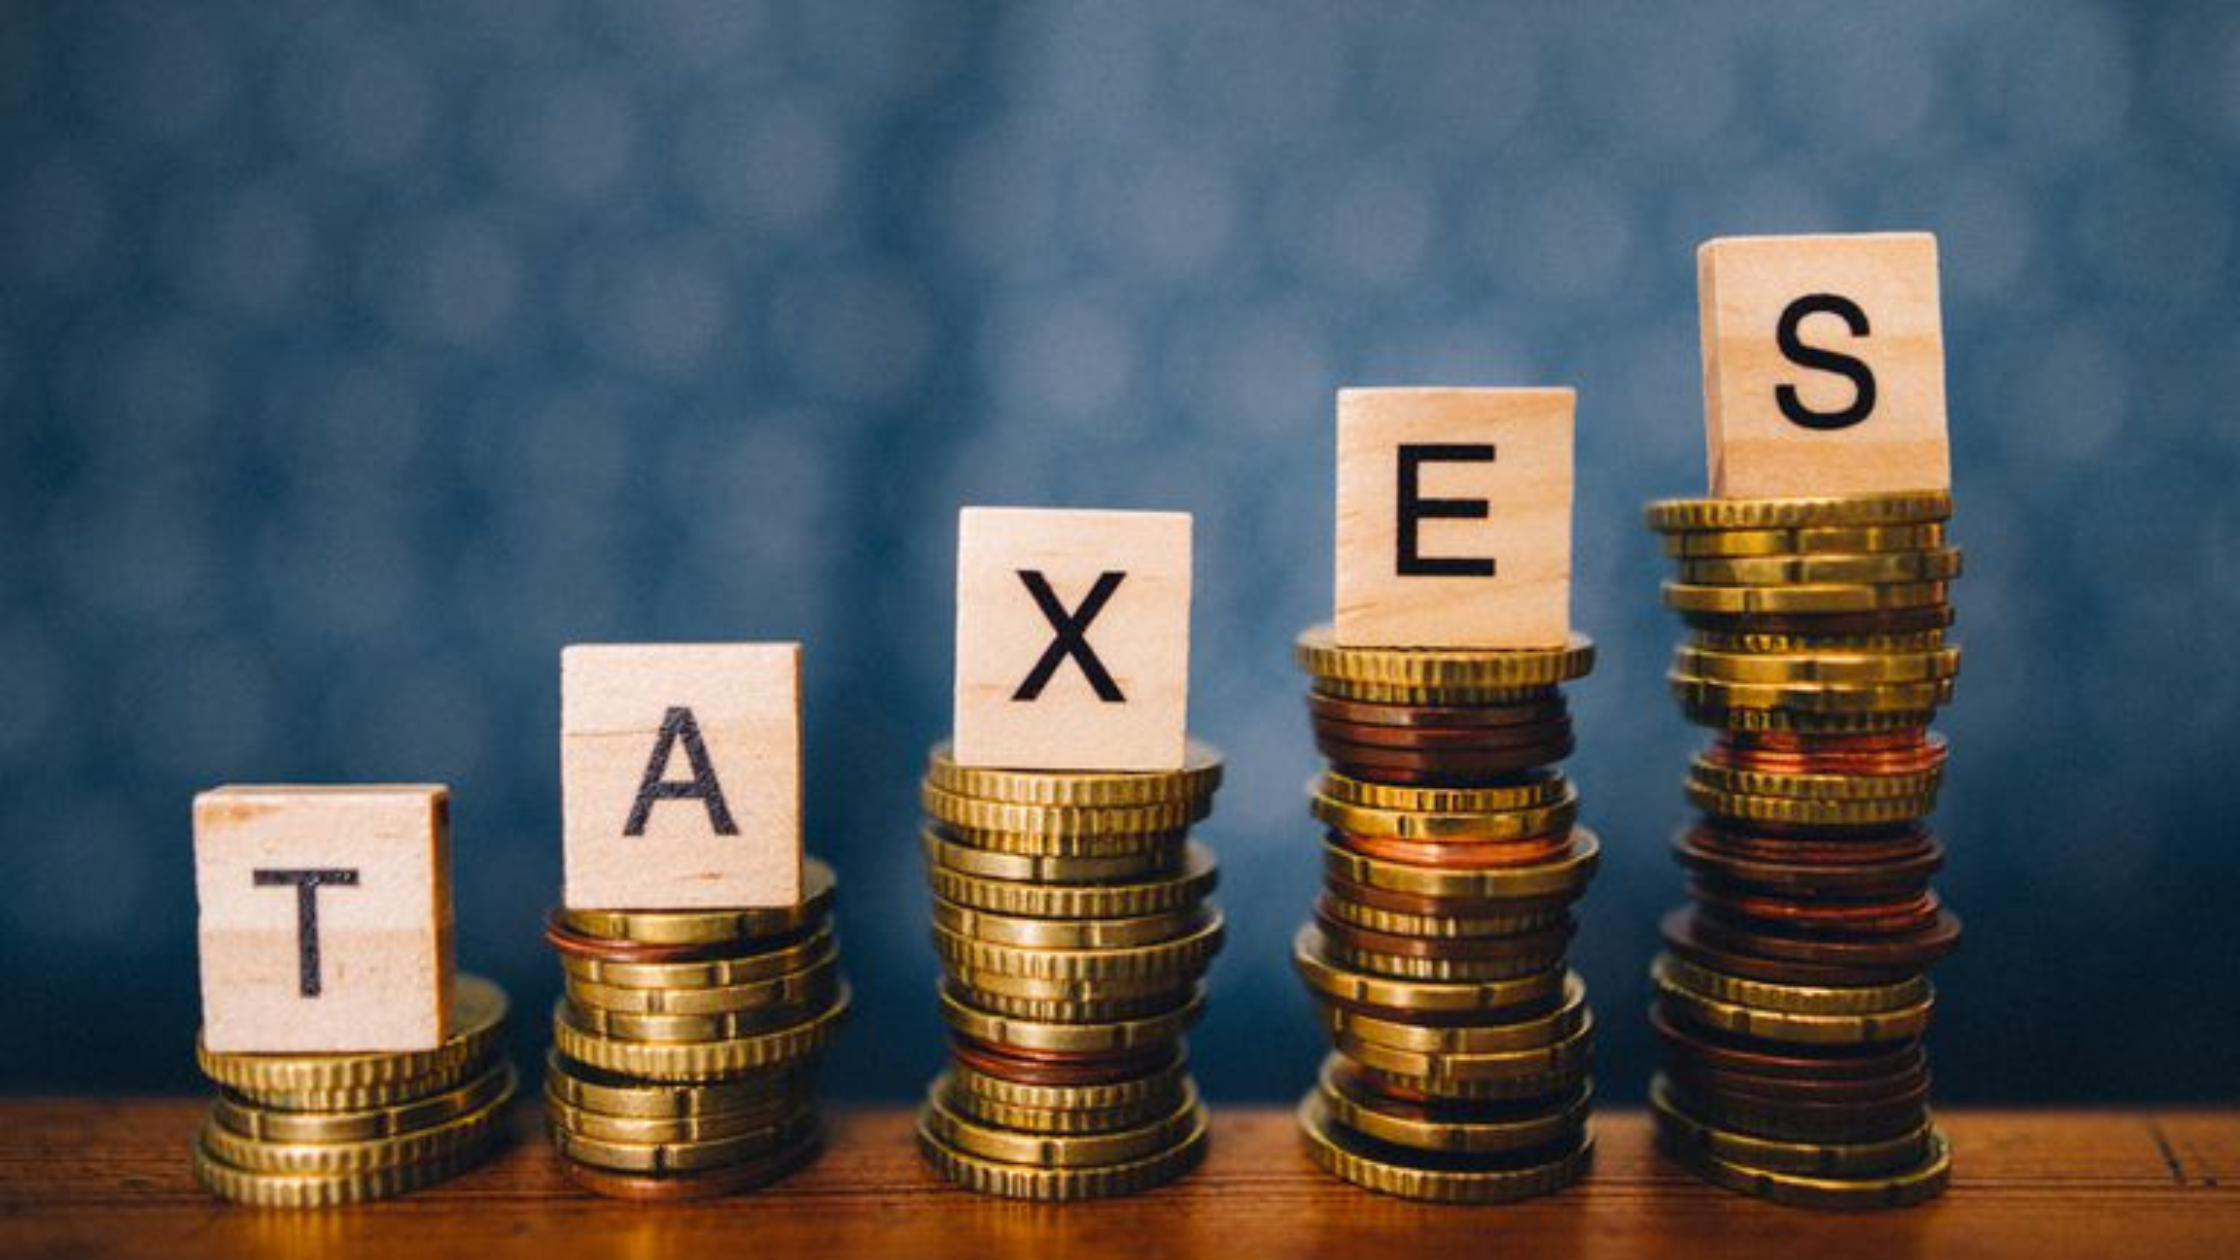 Tax hikes In South Africa to Fund BIG Will Invite Consequences - Intellidex